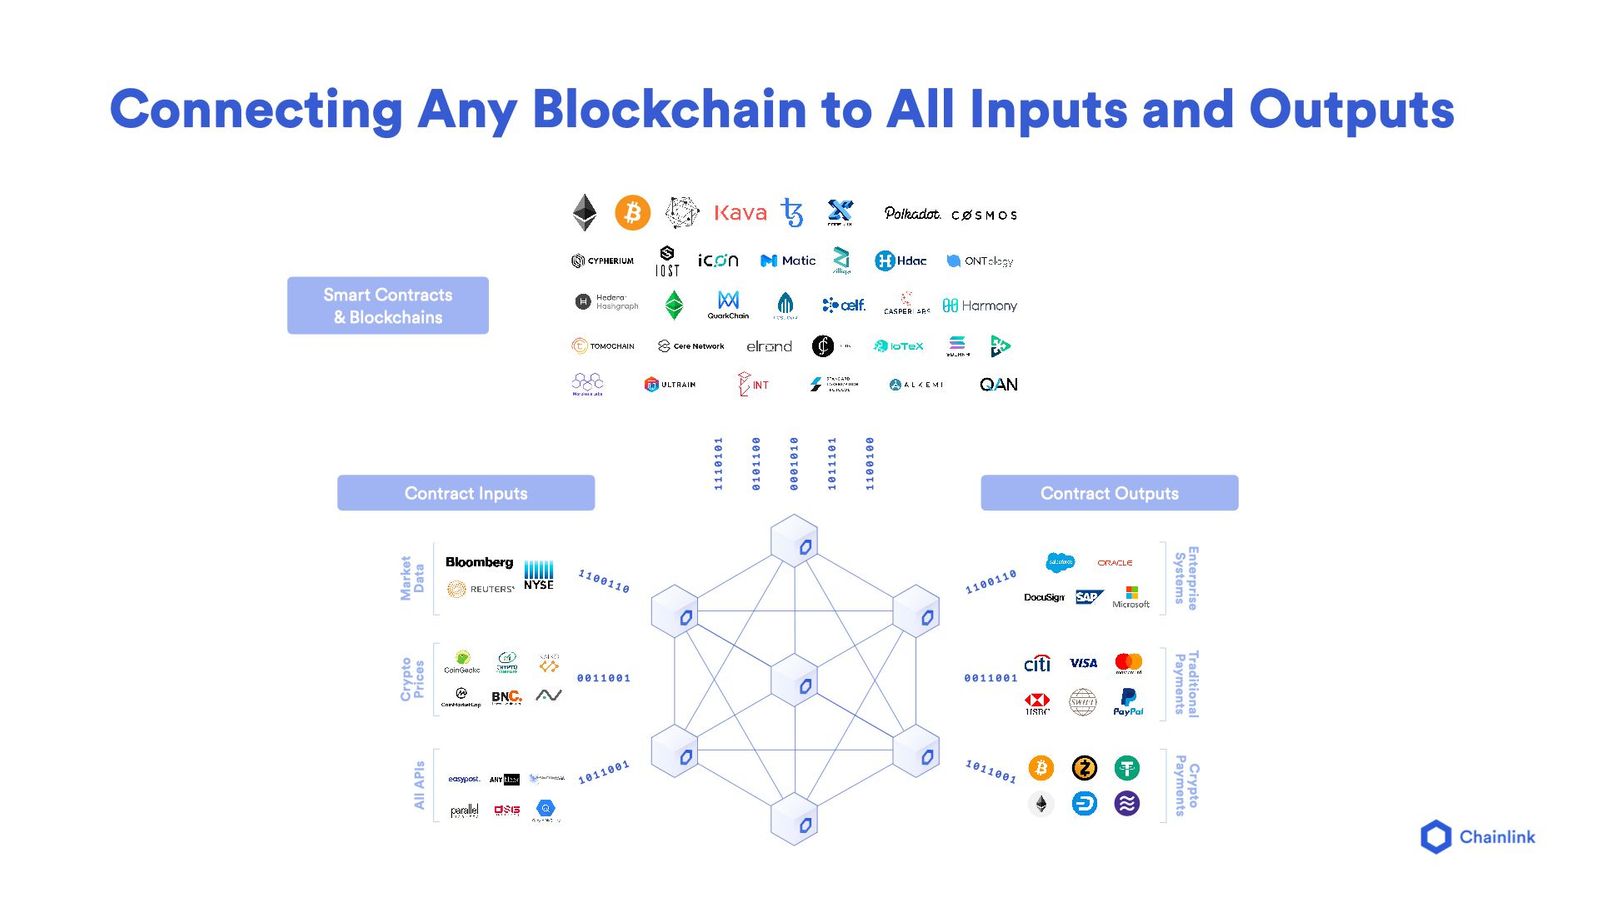 Connecting a Blockchain to All Inputs and Outputs